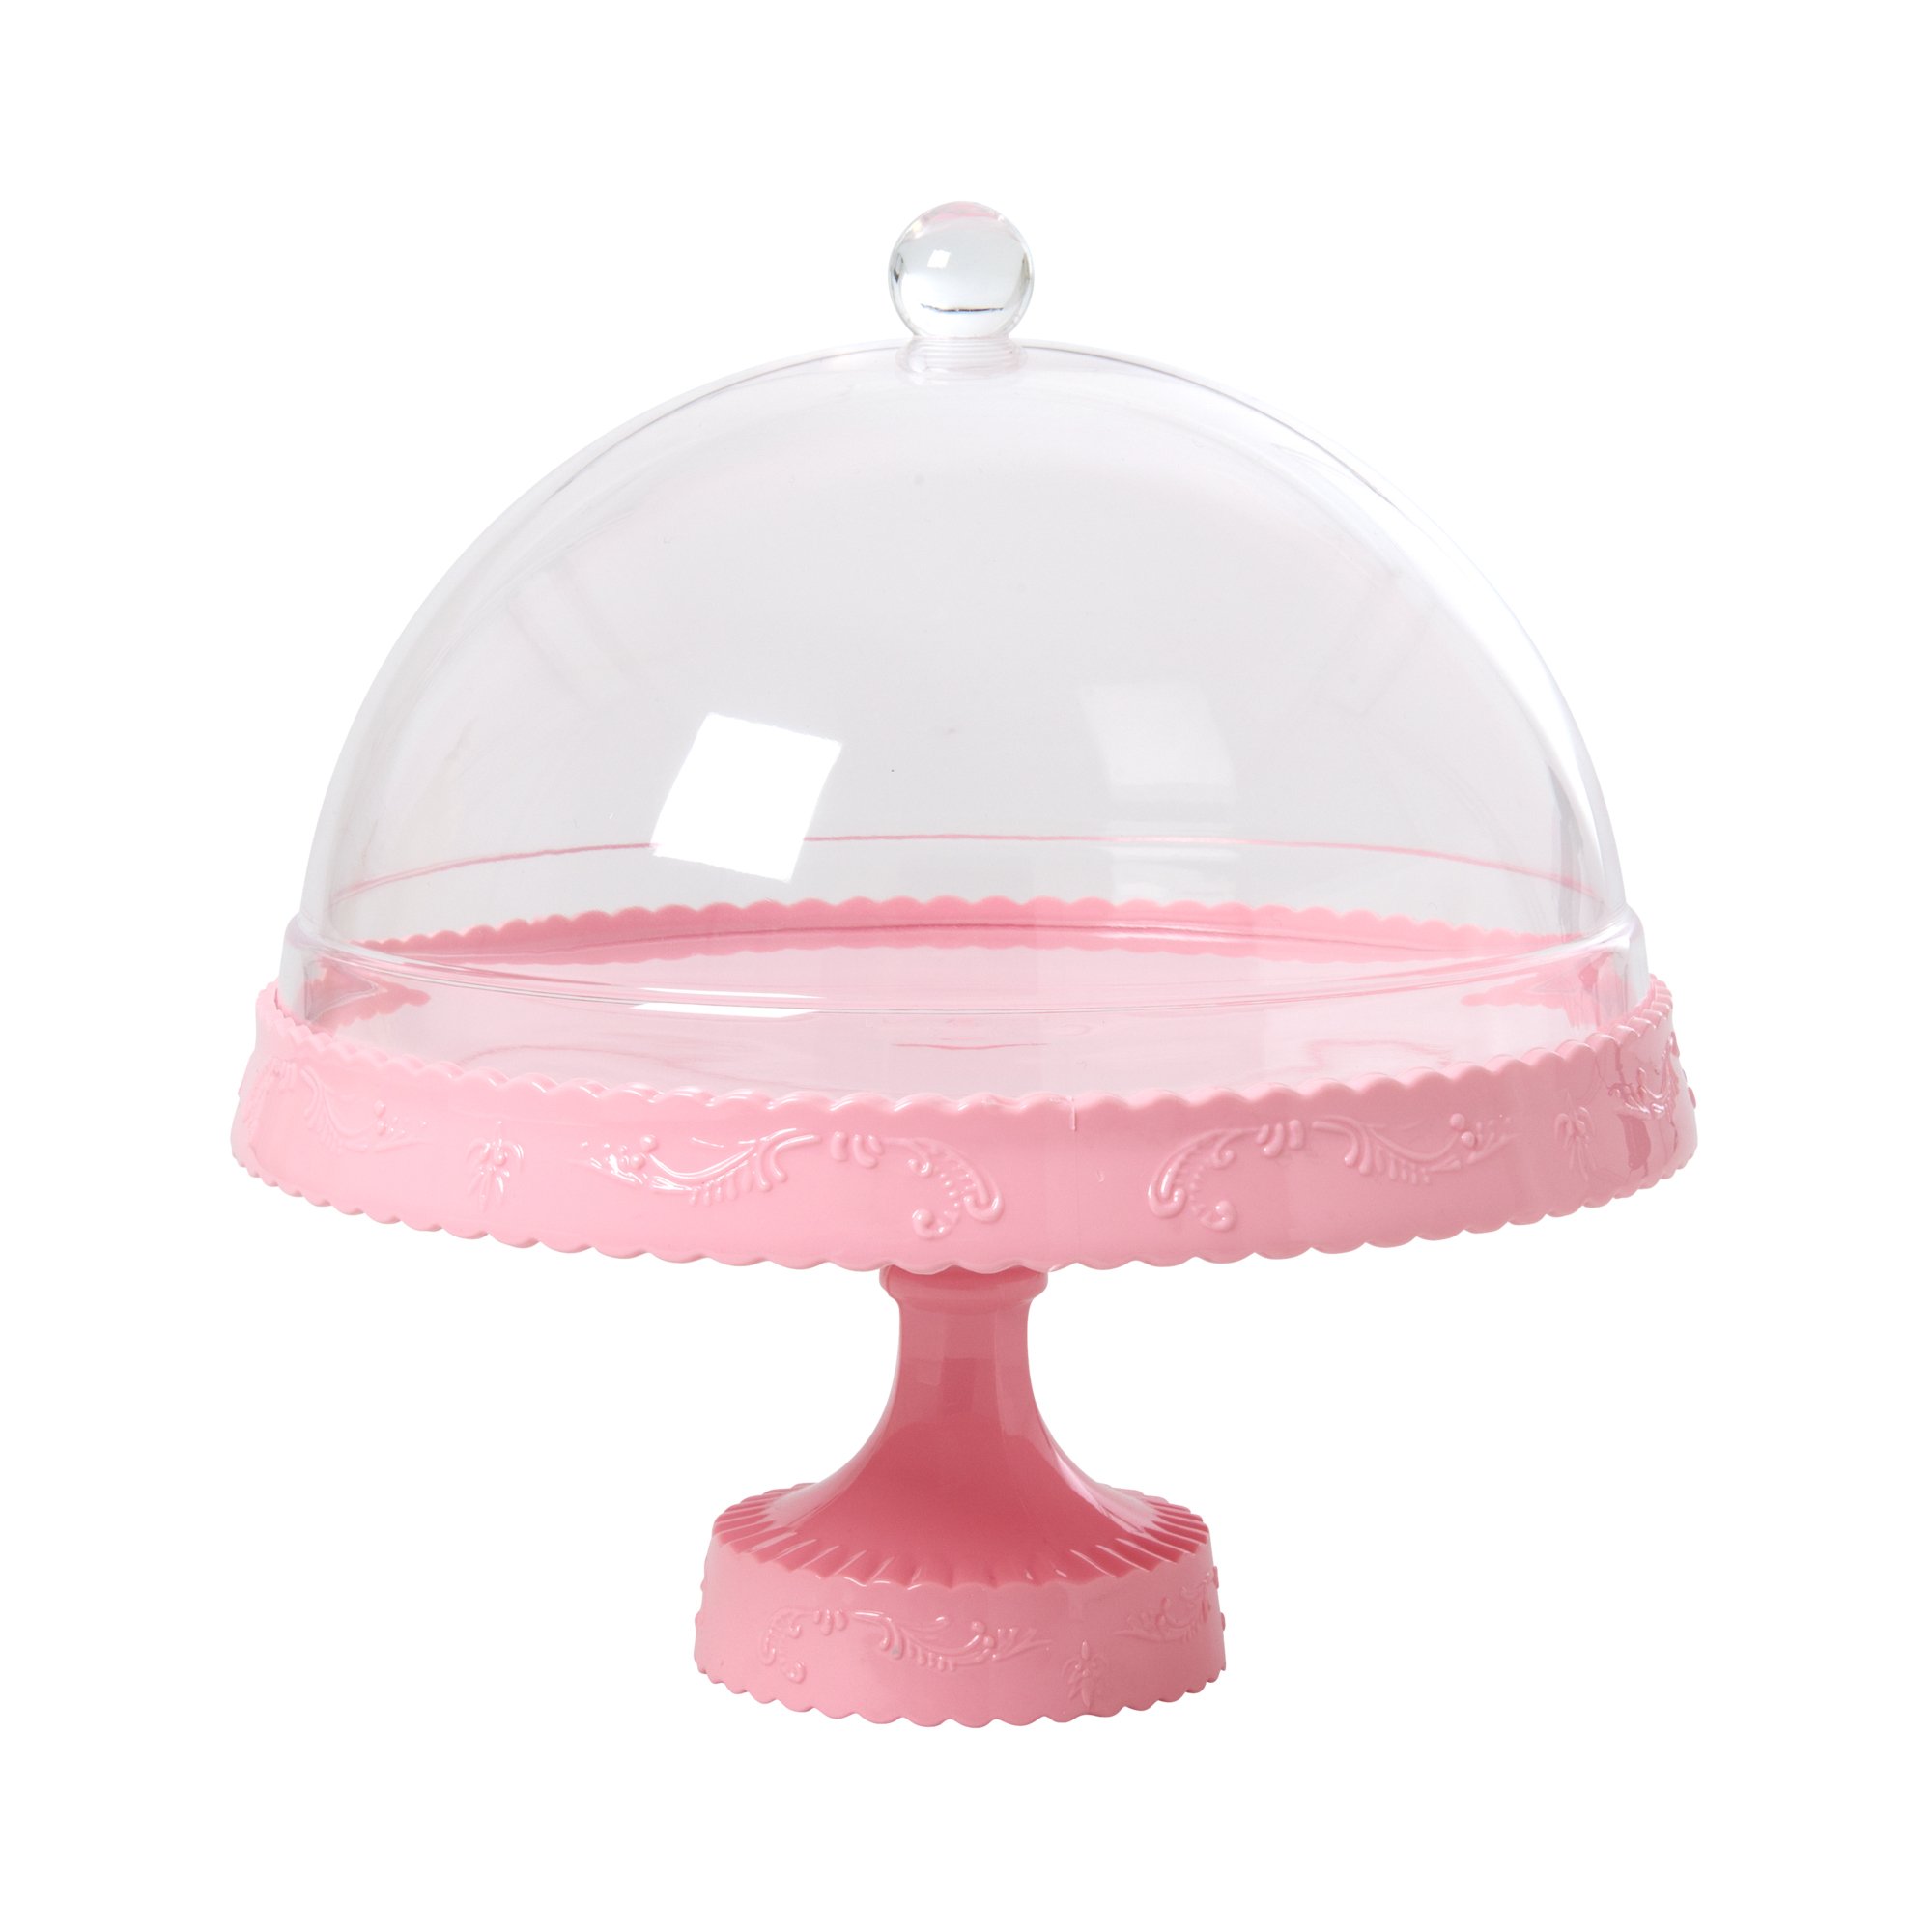 RICE Pink cake stand &amp; Dome €39.90,